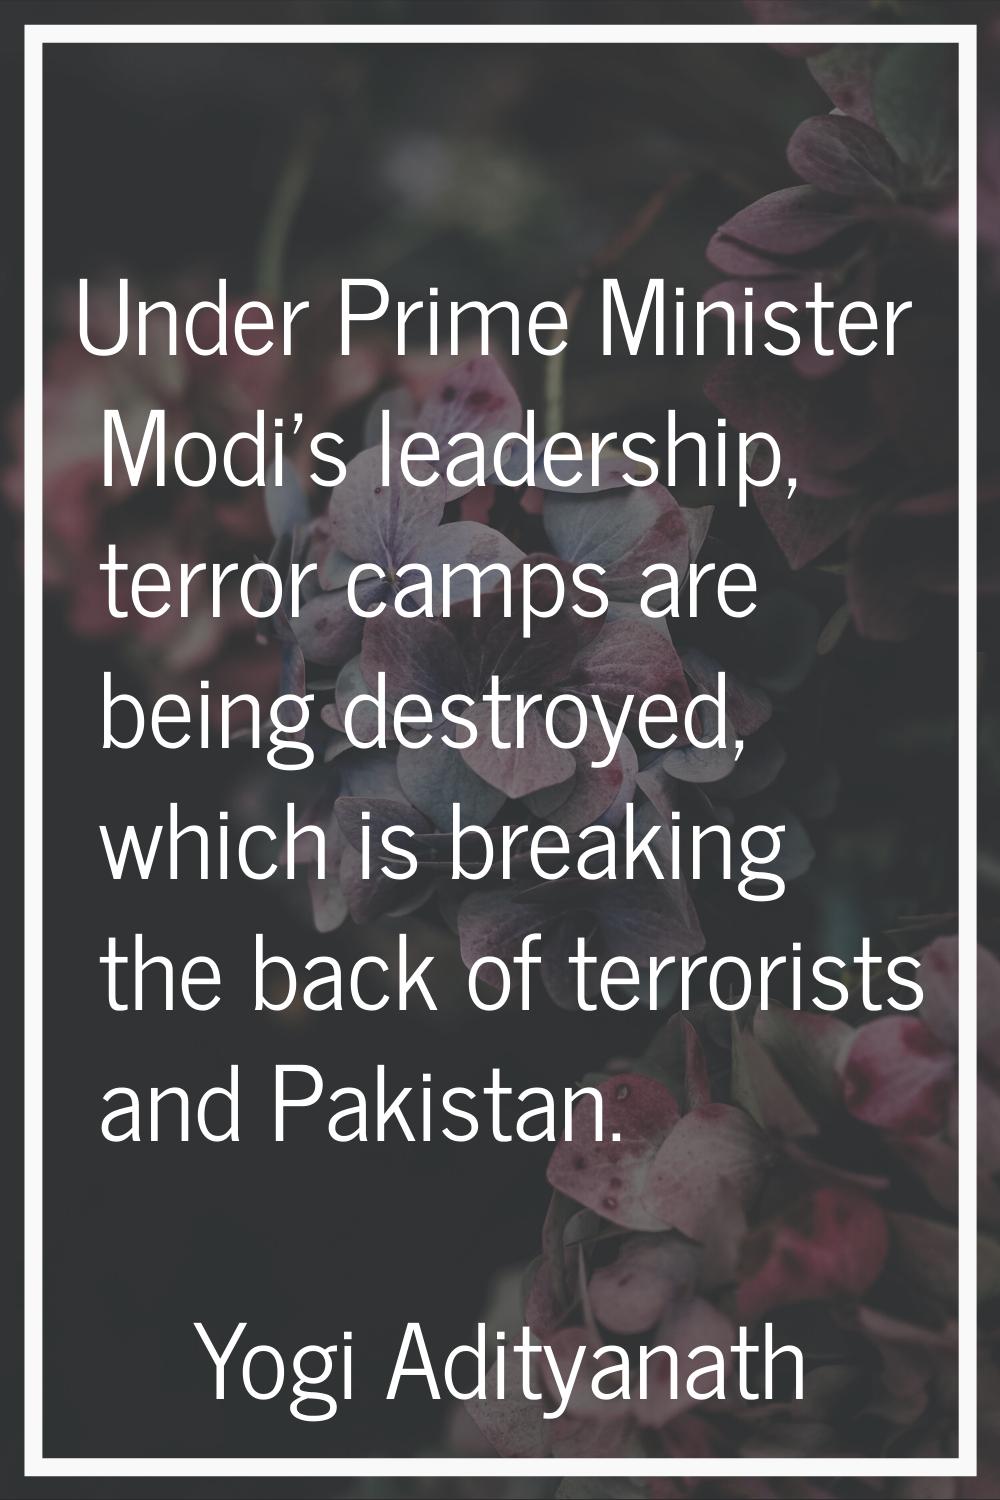 Under Prime Minister Modi's leadership, terror camps are being destroyed, which is breaking the bac